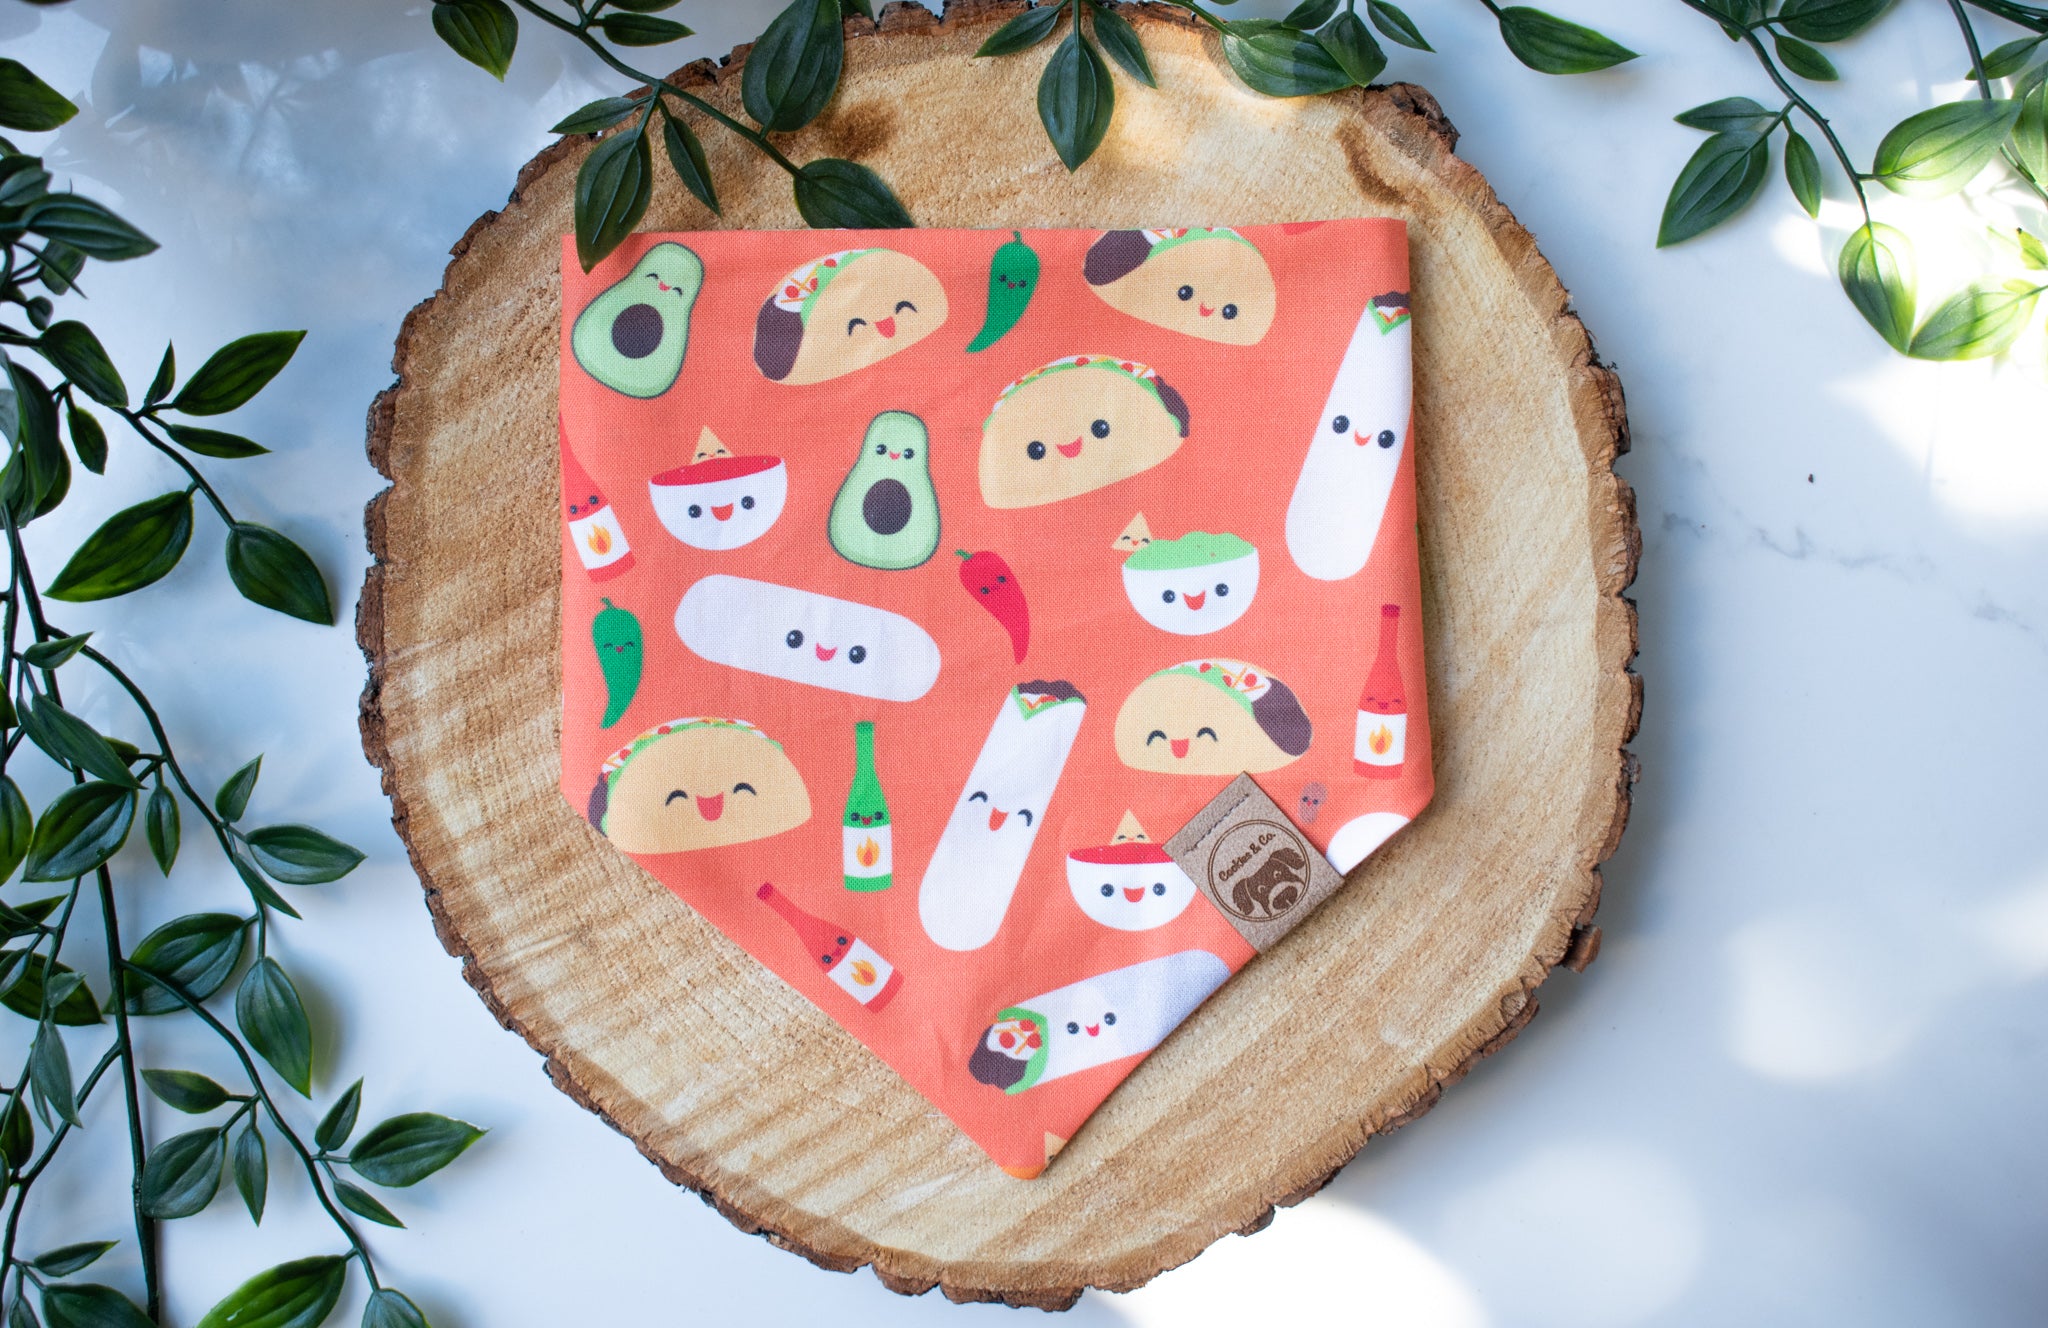 Let's Taco About It dog bandana with snap buttons featuring tacos, burritos, guacamole.